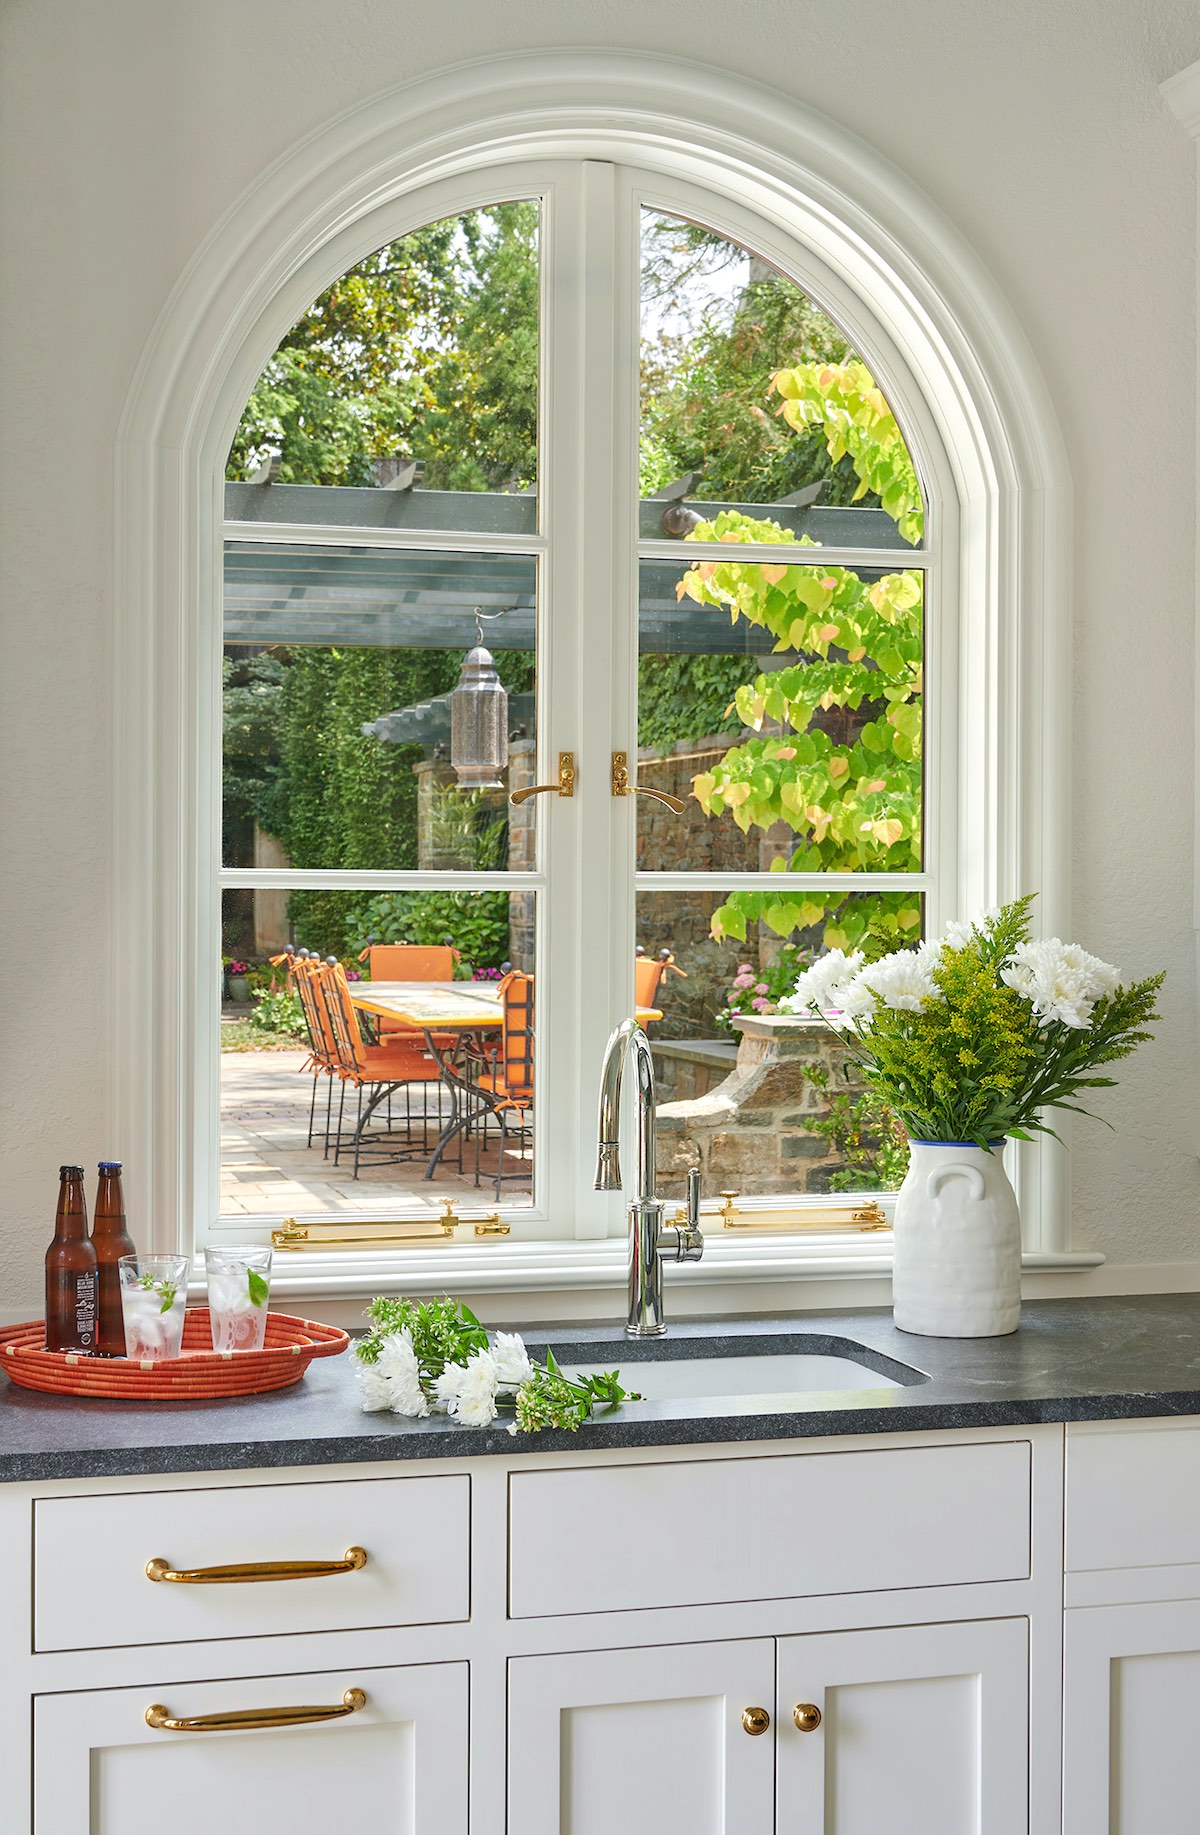 An arched window over the sink opens to pass food and drinks to the pergola dining area beyond.